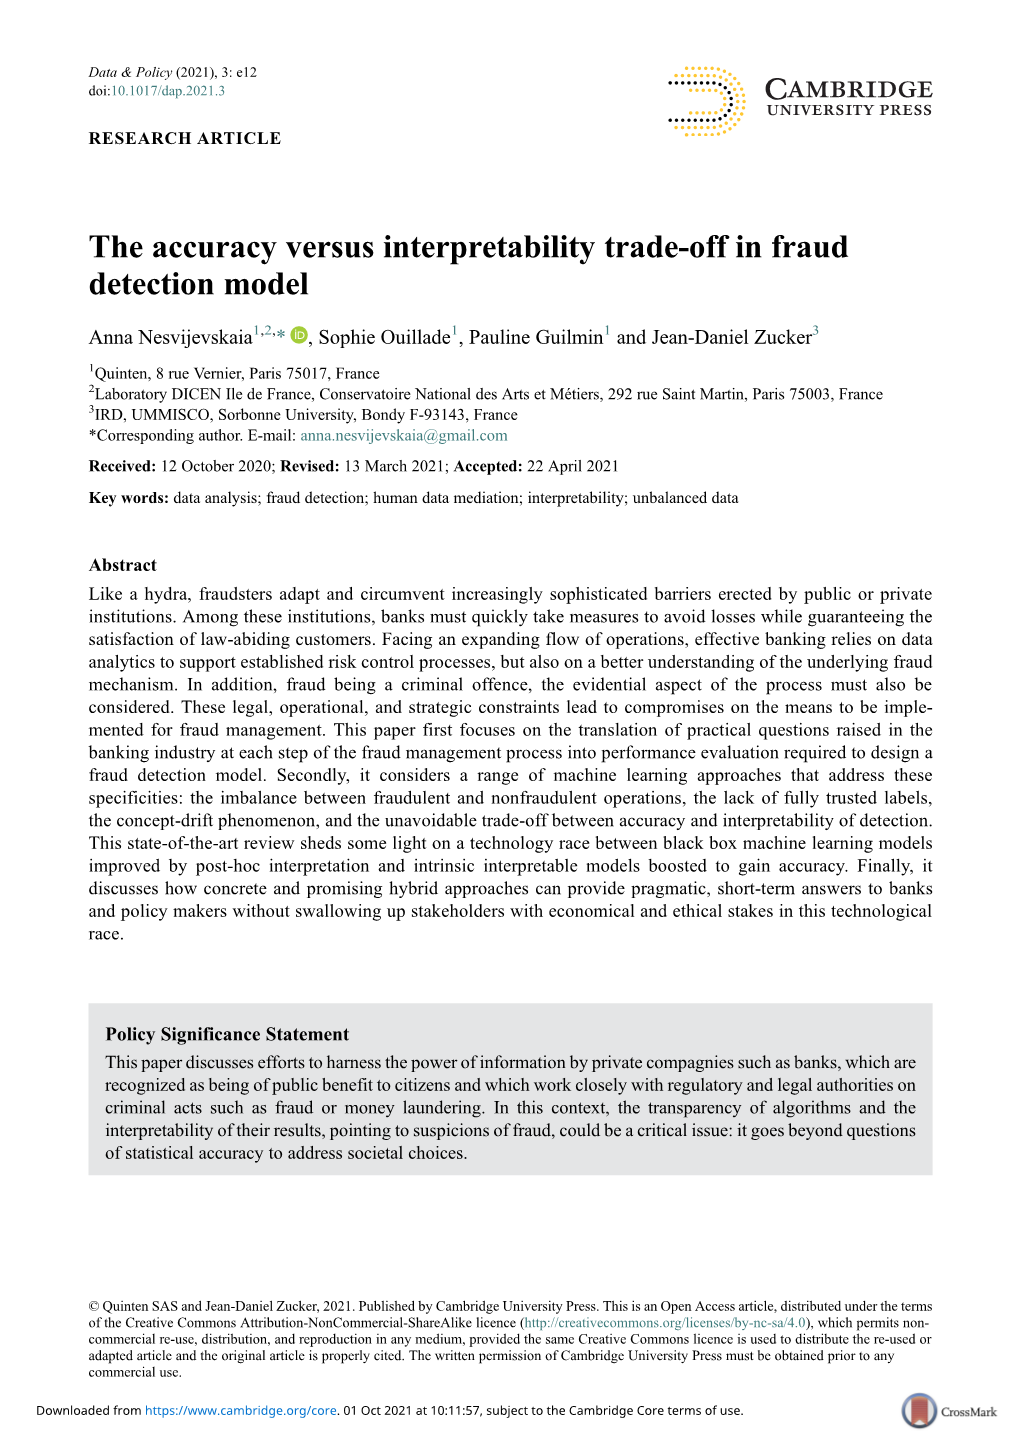 The Accuracy Versus Interpretability Trade-Off in Fraud Detection Model